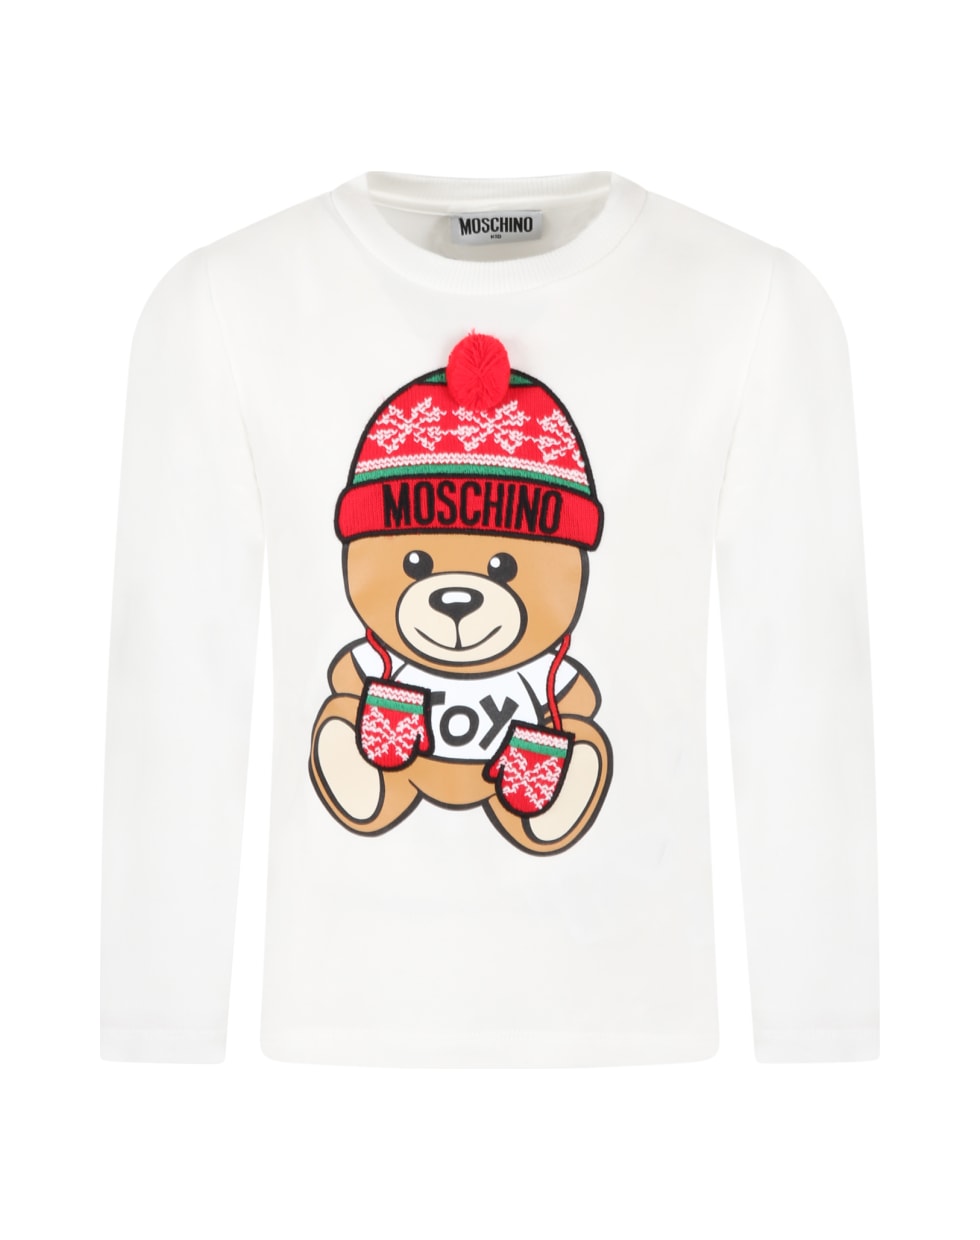 Moschino White T-shirt For Kids With Teddy Bear - Panna